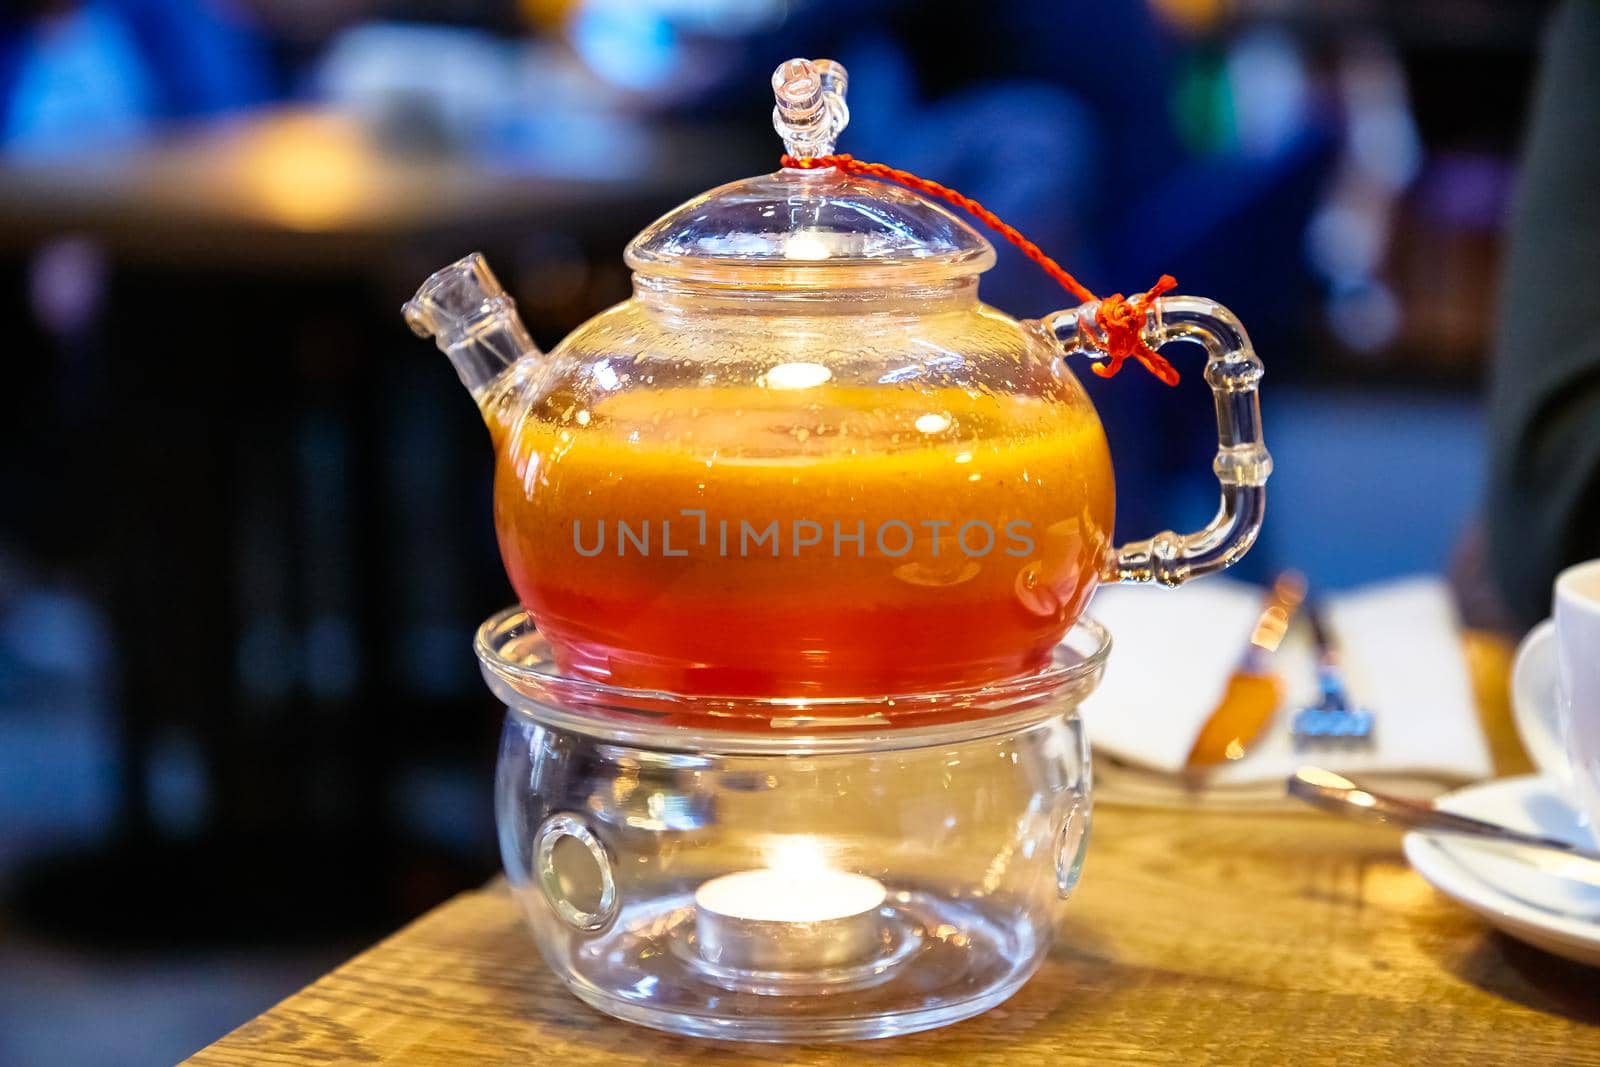 Red tea with sea buckthorn in a glass teapot.